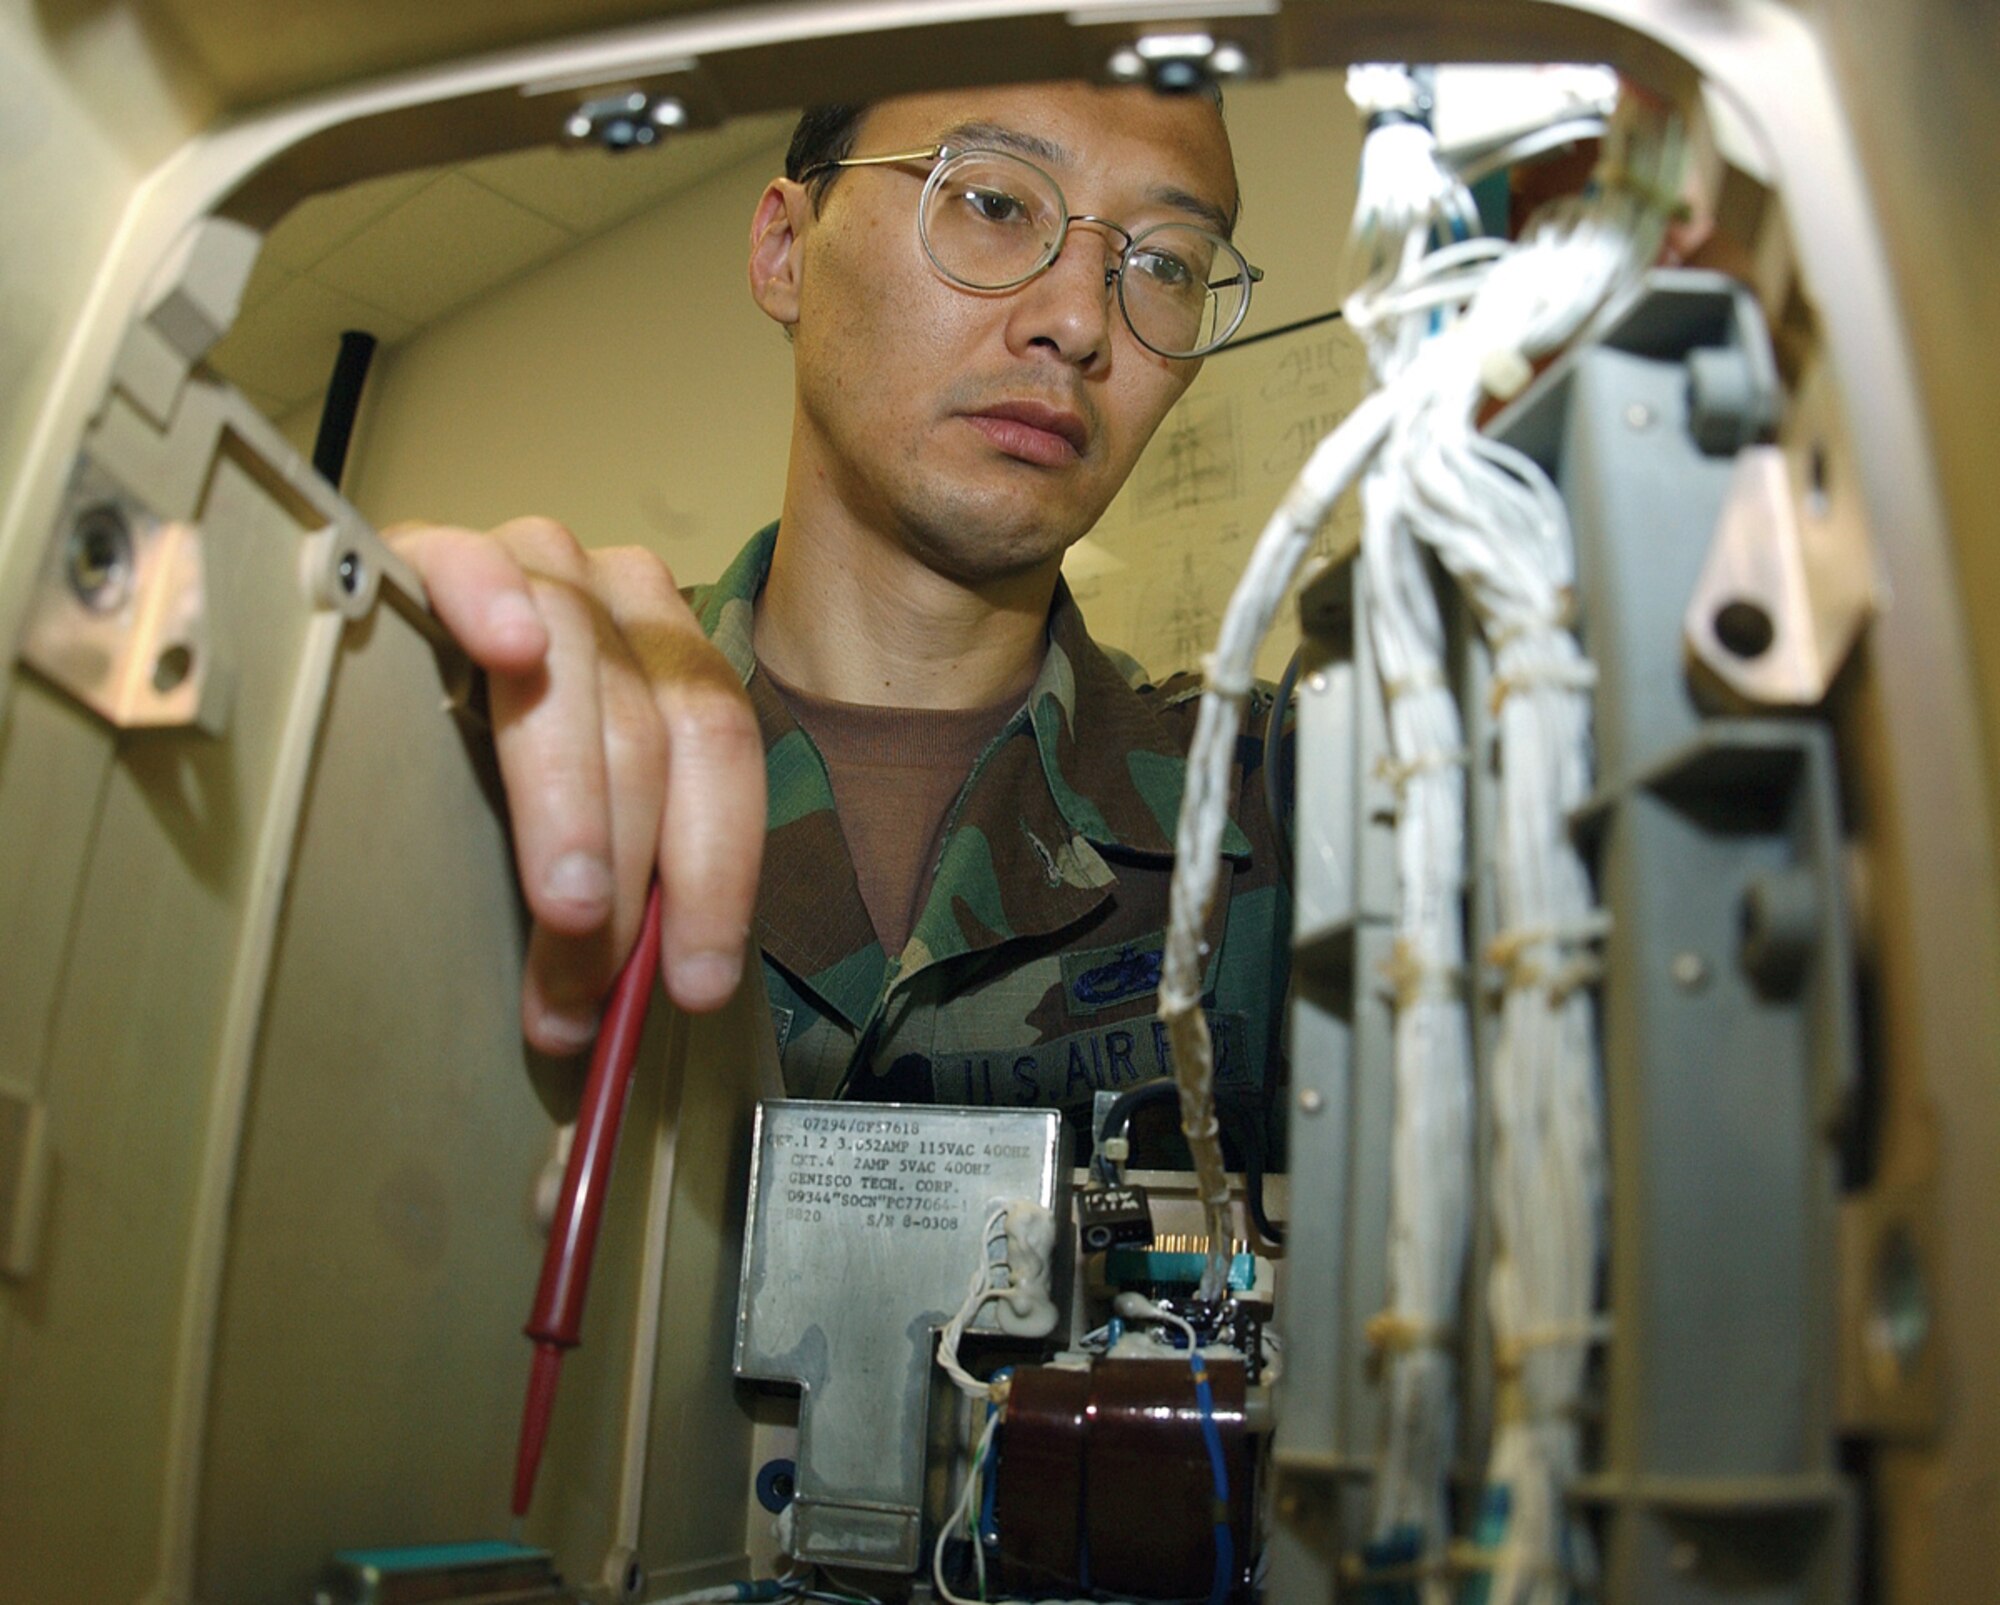 SEYMOUR JOHNSON AIR FORCE BASE, N.C. -- Tech. Sgt. Mark Kobayashi, a circuit card repair technician, works on a multi-purpose display unit.  His suggestion to repair these units and heads-up display units locally saved the Air Force more than $2.7 million, for which he was awarded $18,000.  Sergeant Kobayashi is assigned to the 4th Maintenance Group here.  (U.S. Air Force photo by Airman 1st Class J.G. Buzanowski)